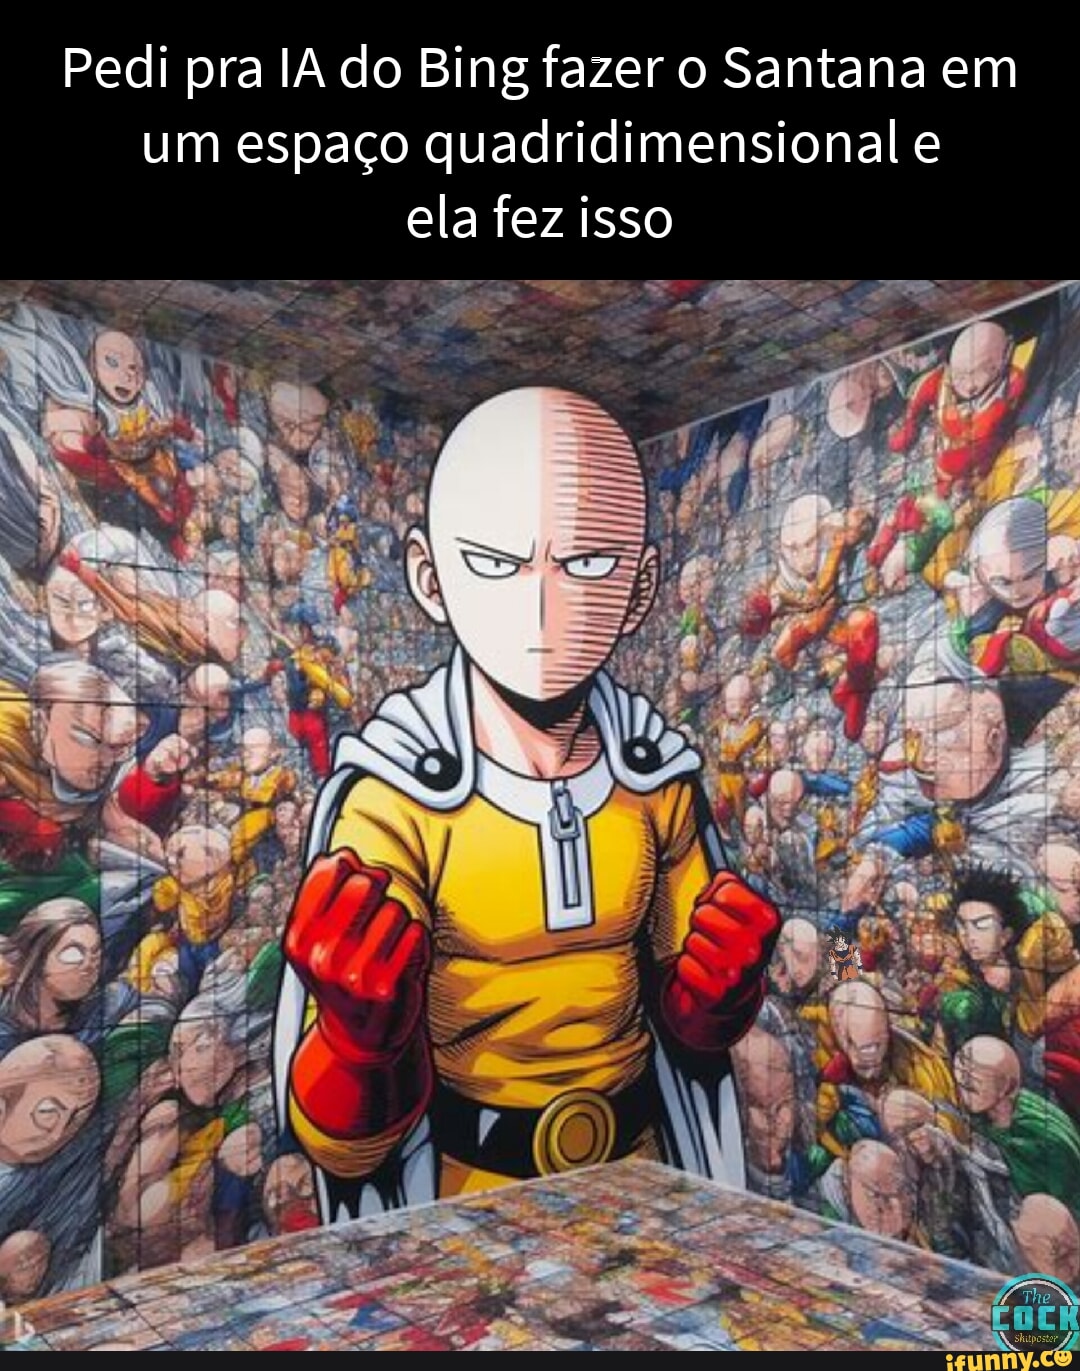 1001 memes. Best Collection of funny 1001 pictures on iFunny Brazil